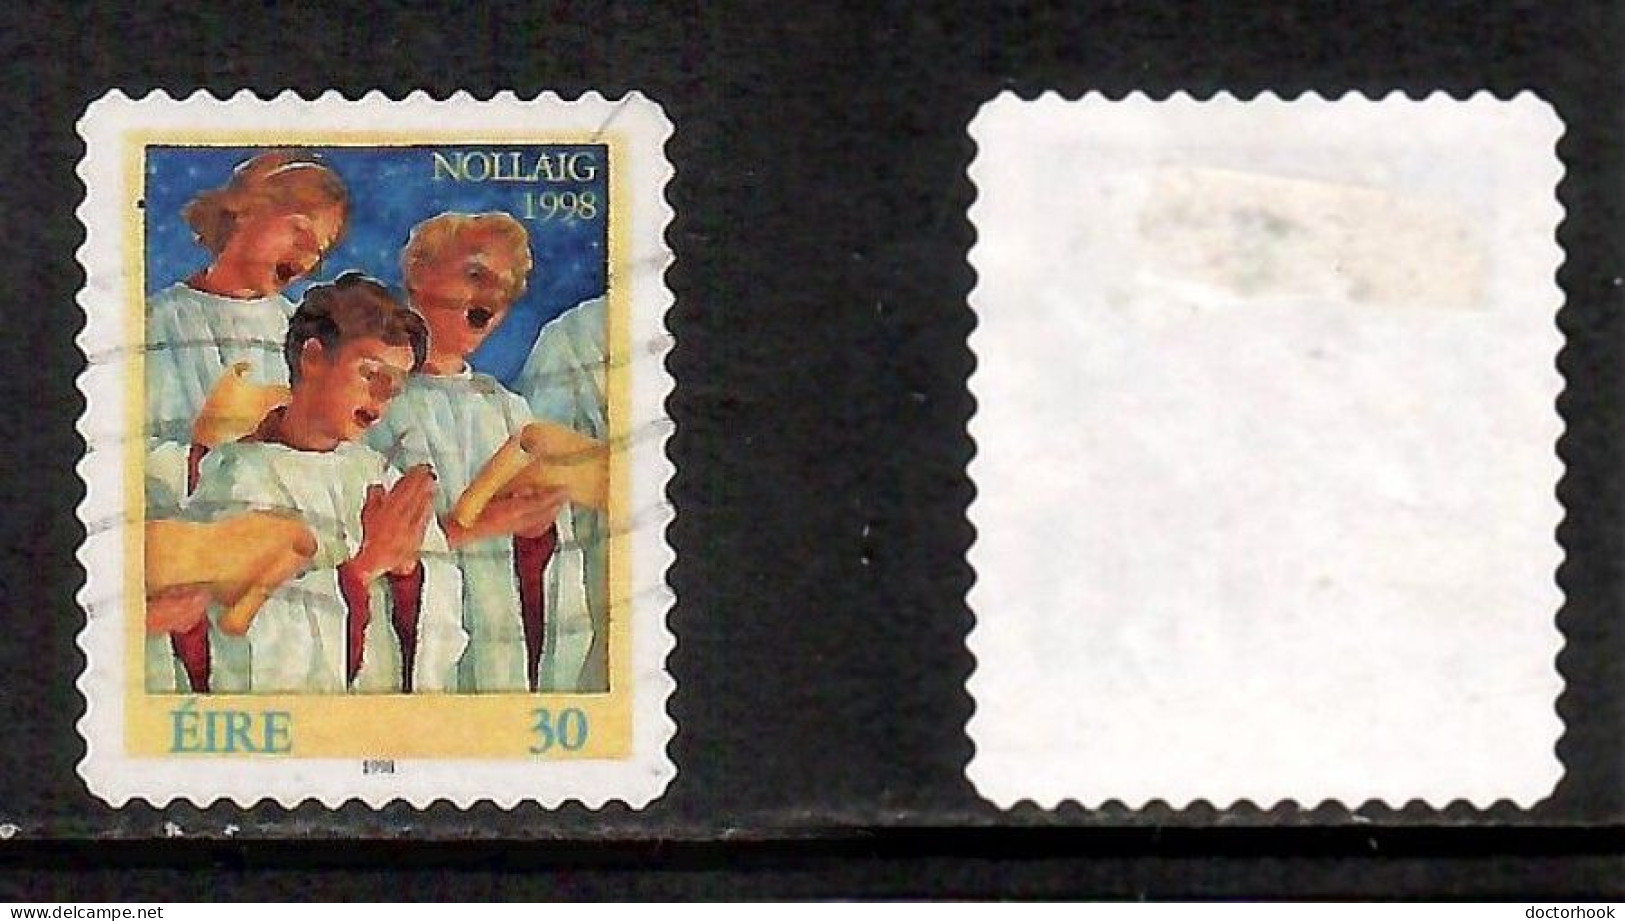 IRELAND   Scott # 1160 USED (CONDITION AS PER SCAN) (Stamp Scan # 992-4) - Oblitérés